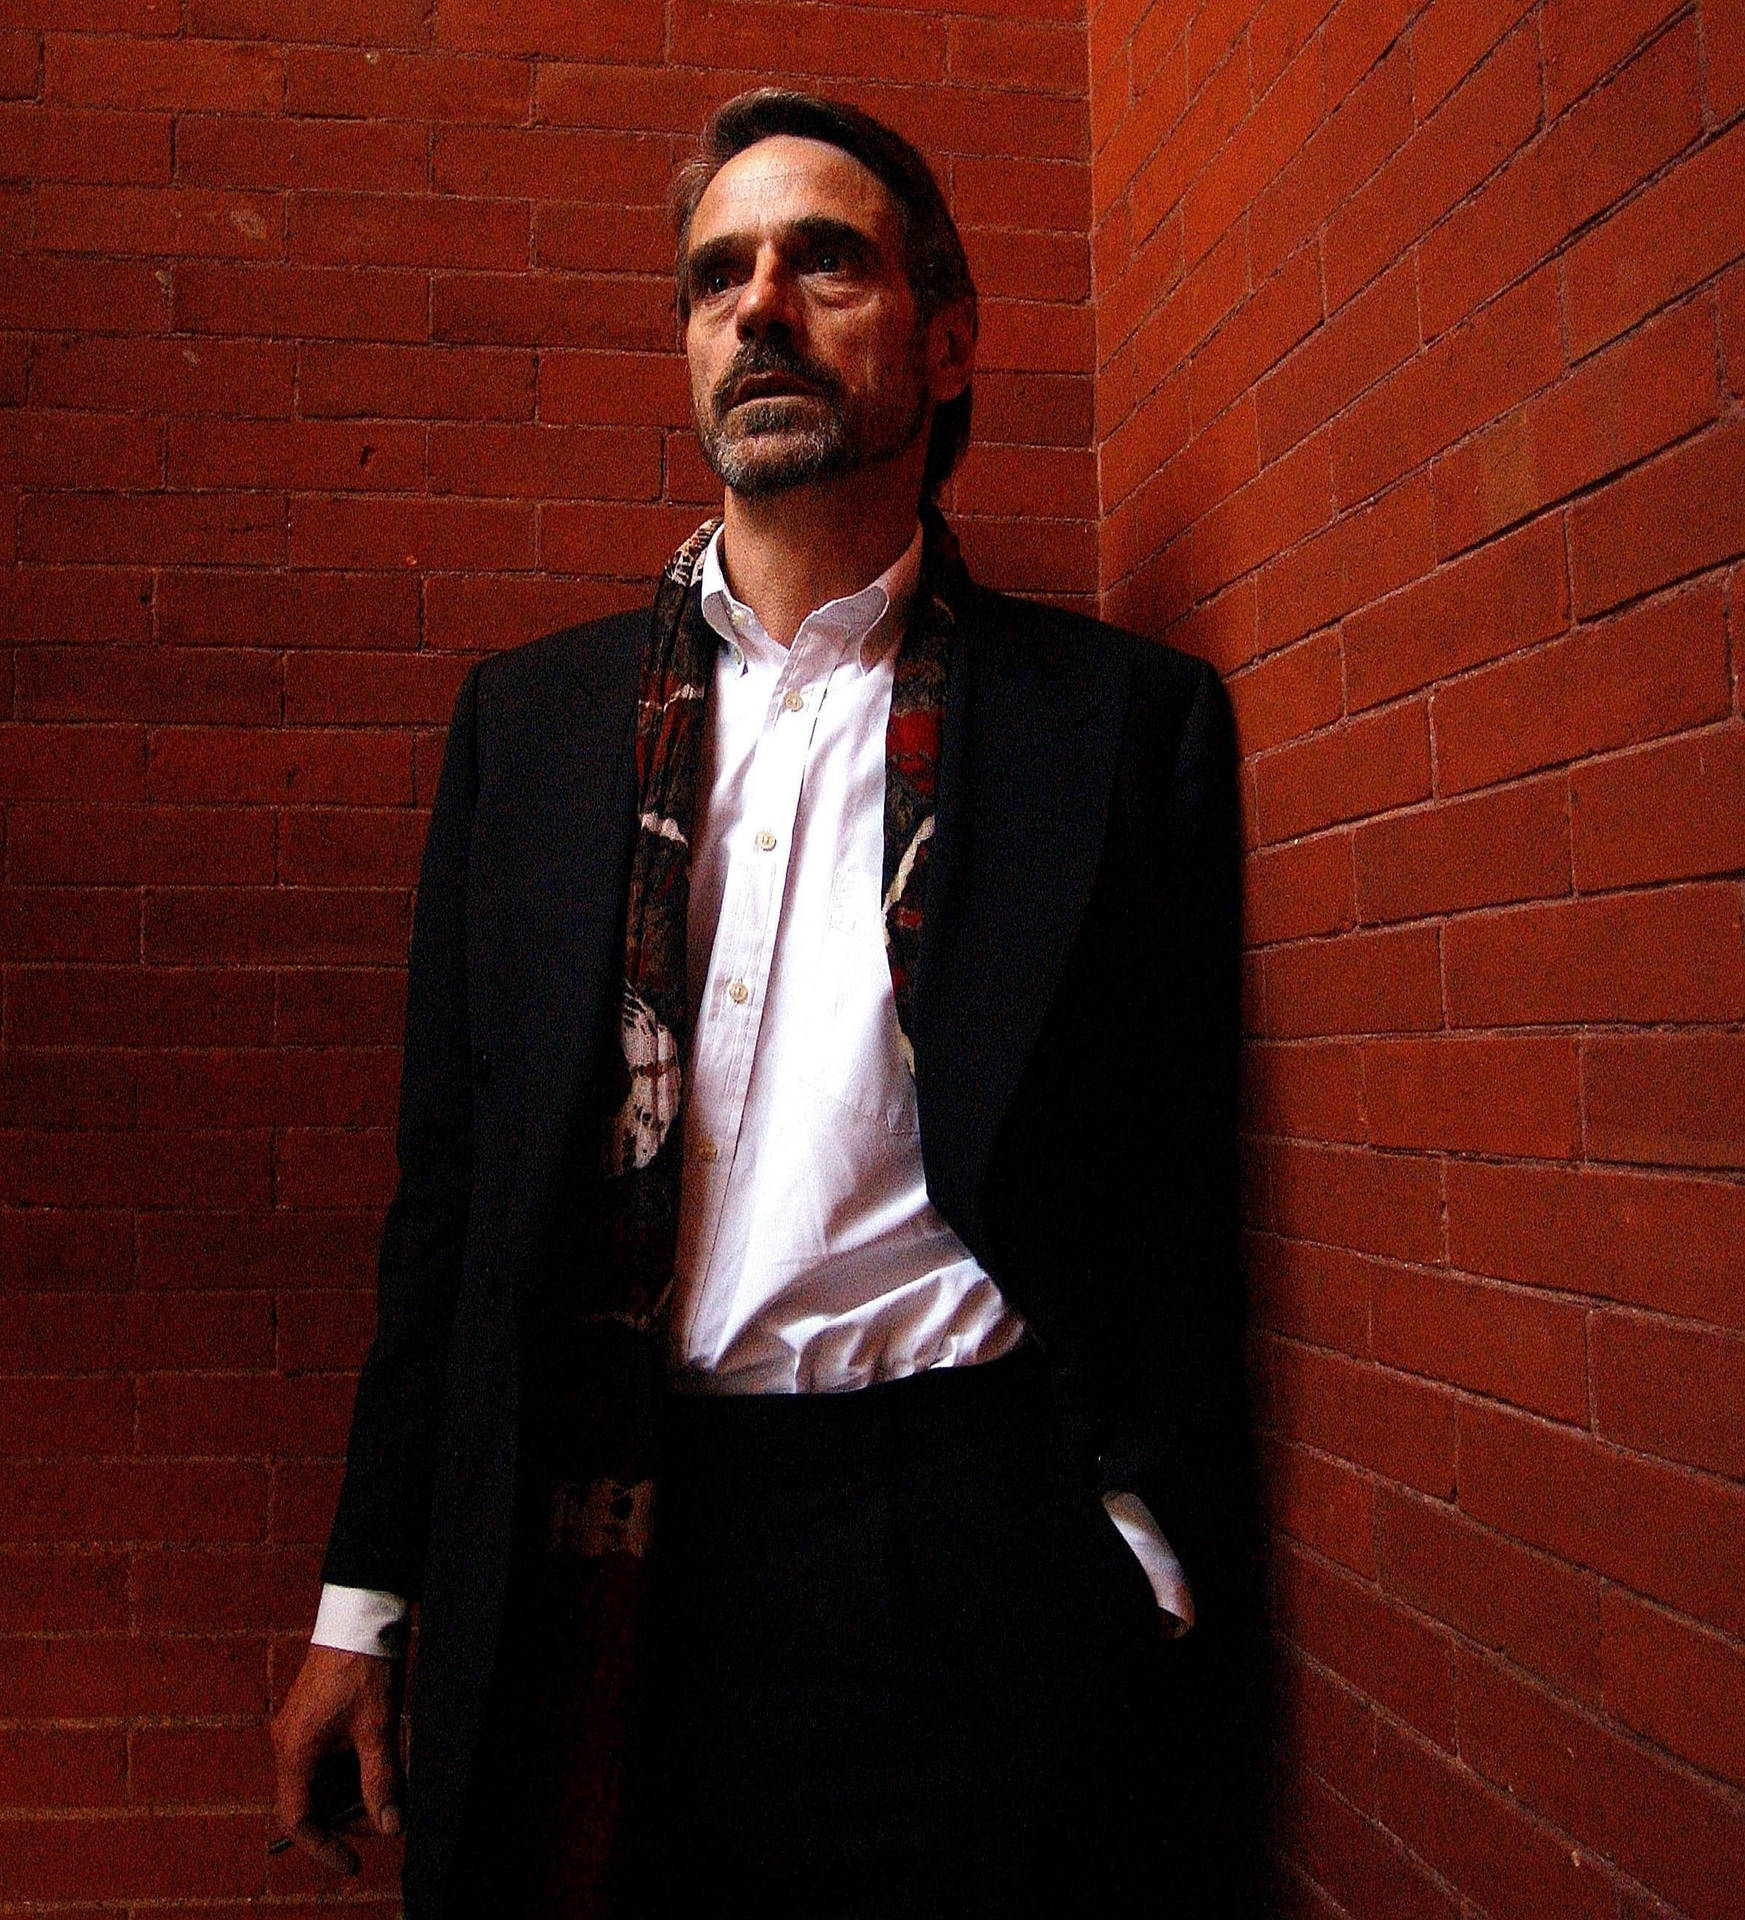 Jeremy Irons With Brick Wall Wallpaper